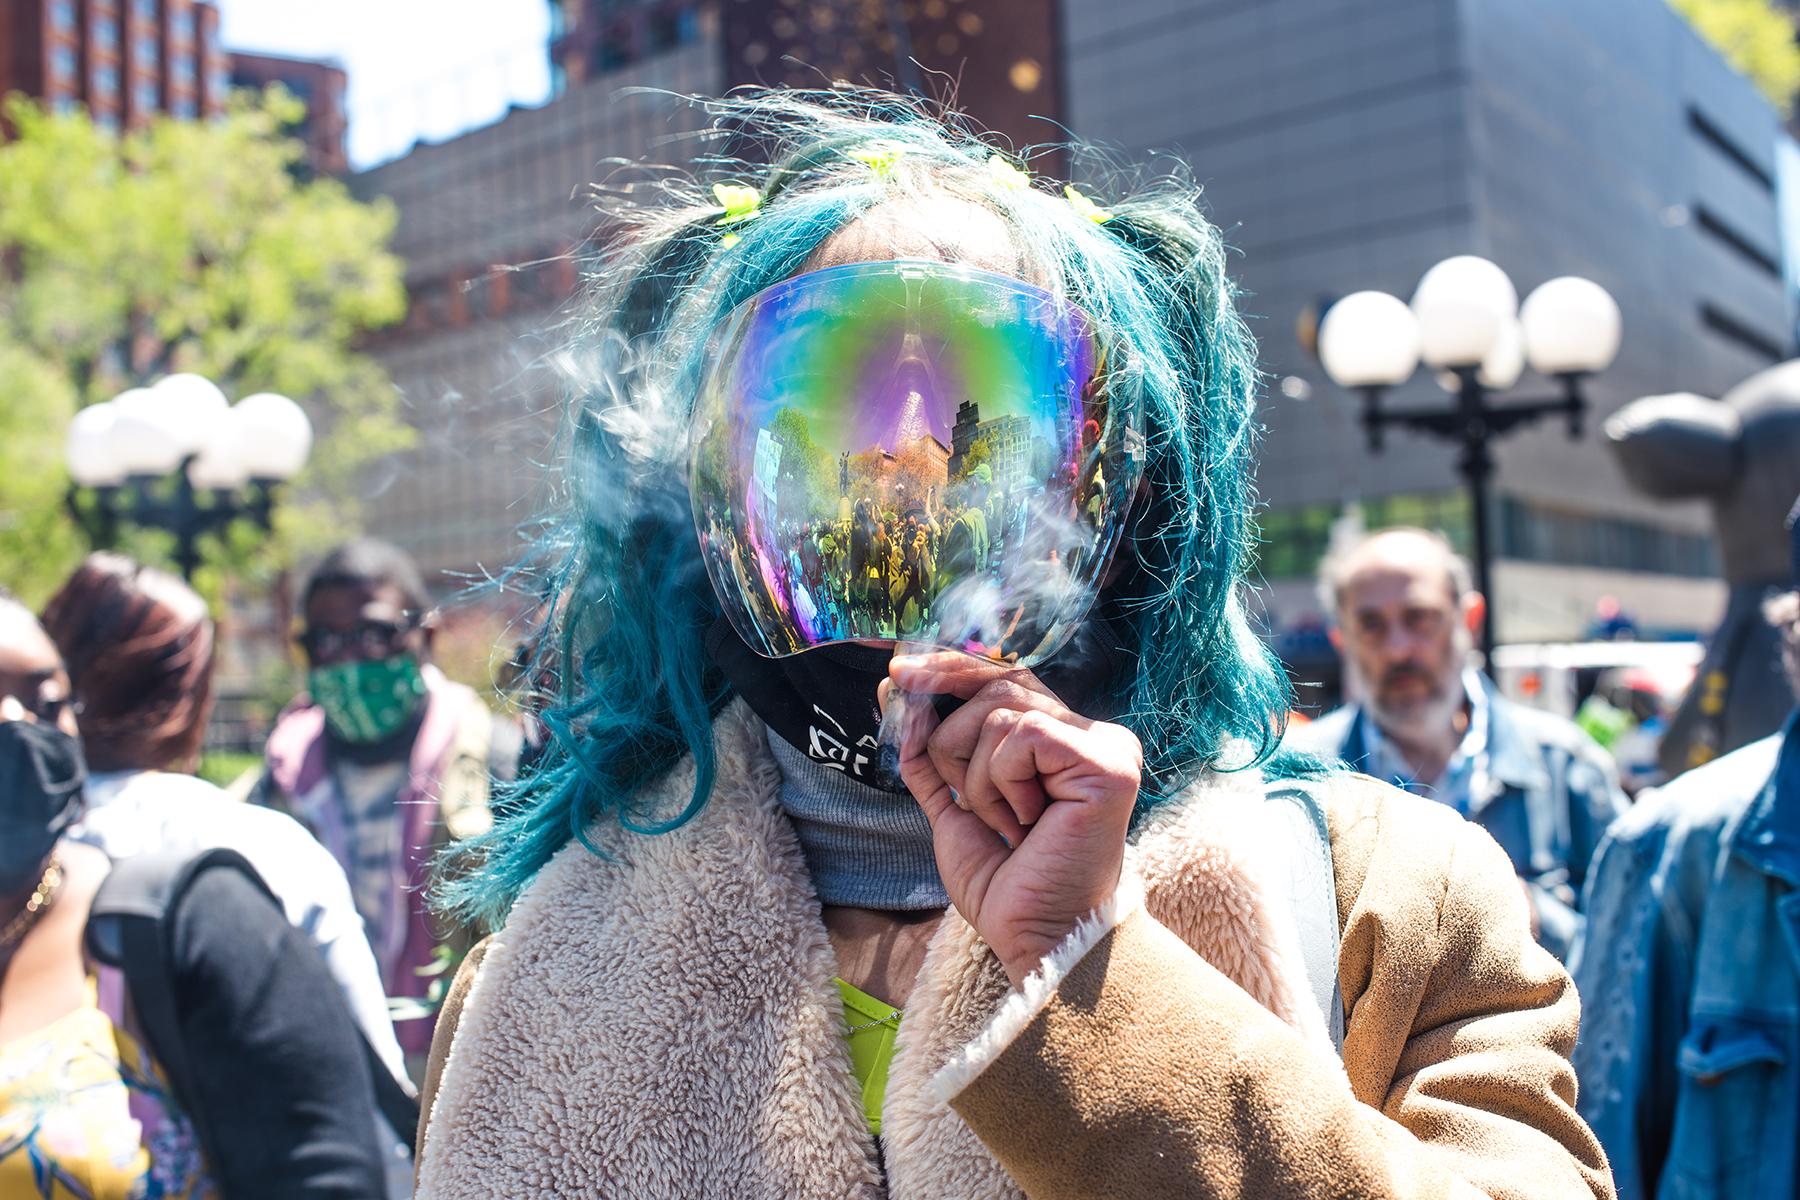 New York City Revelers Legally Light Up at Annual Cannabis Parade & Rally